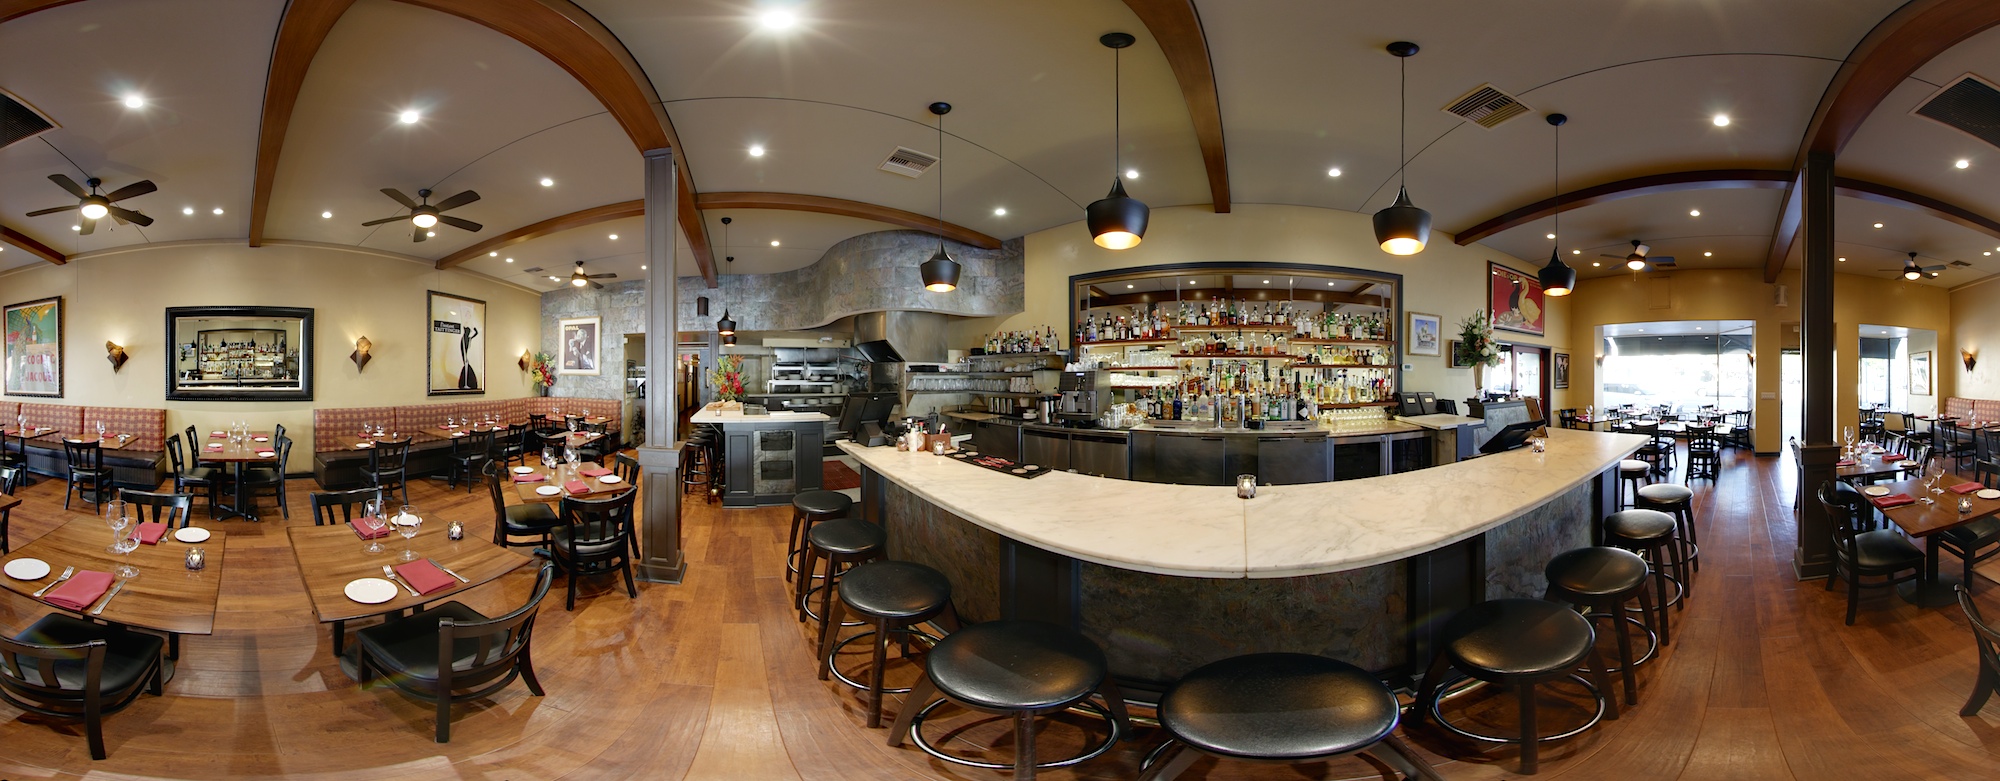 Visit Opal restaurant with the new 2019 Google virtual tour on Google Street View